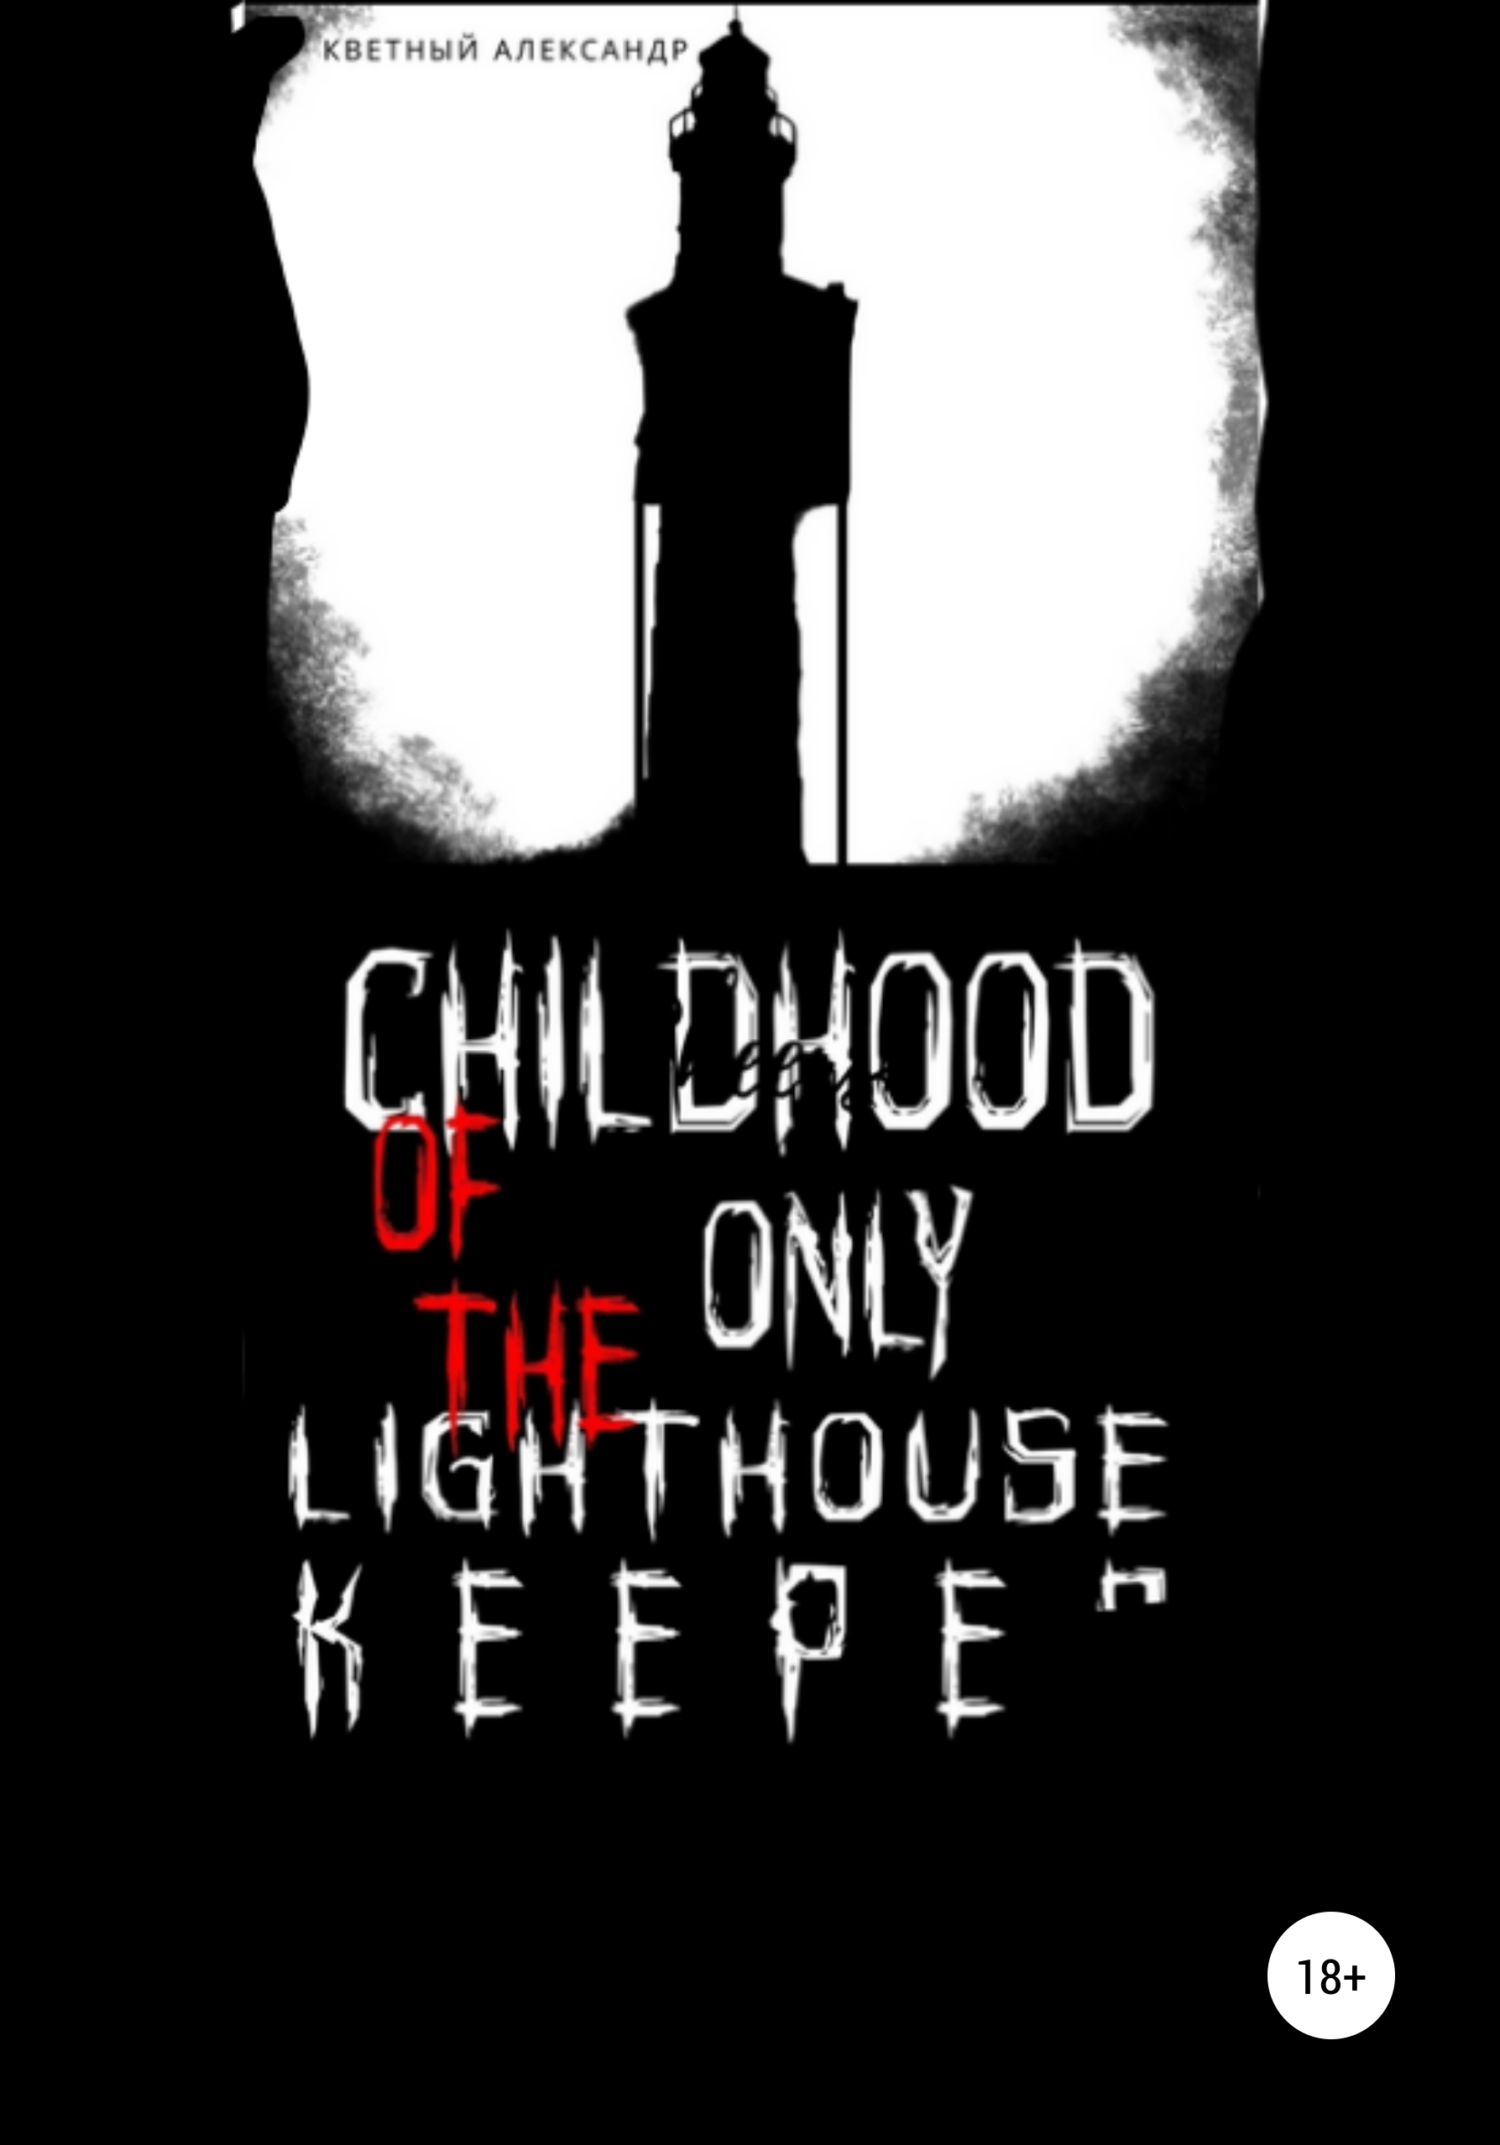 Childhood of the only lighthouse keeper (fb2)